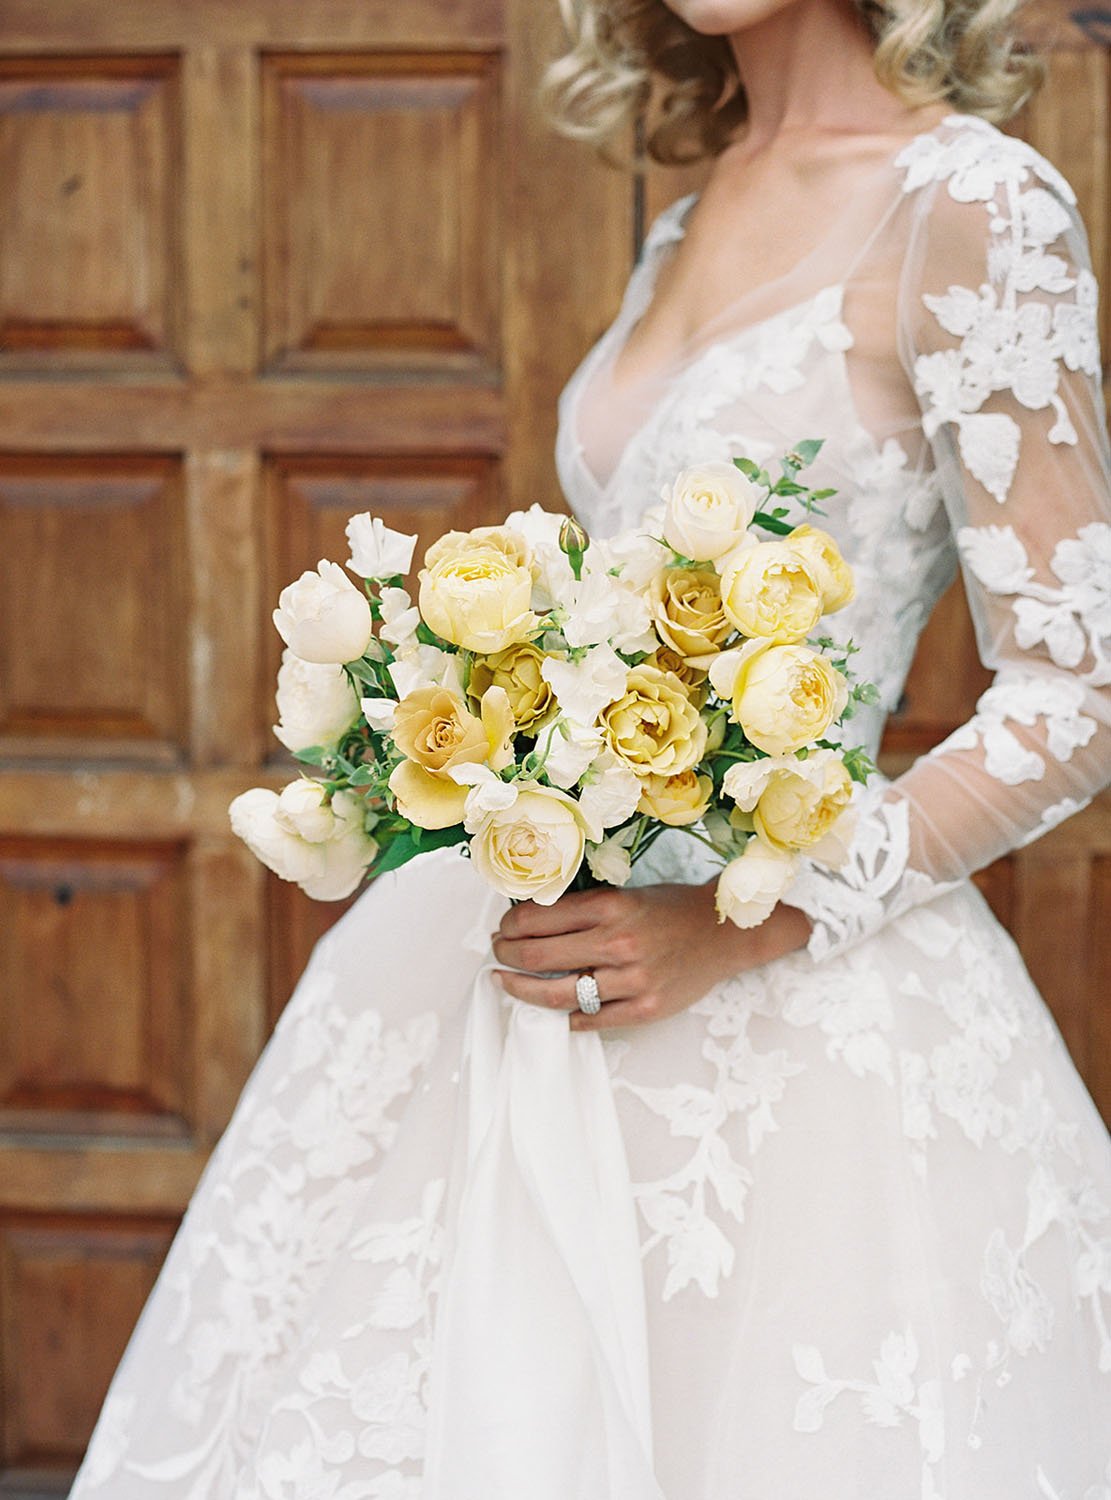  A bride wearing 'Maeve' by Monique Lhuillier wedding dress and holding a gorgeous bridal bouquet of pale yellow and white Davis Austin roses 